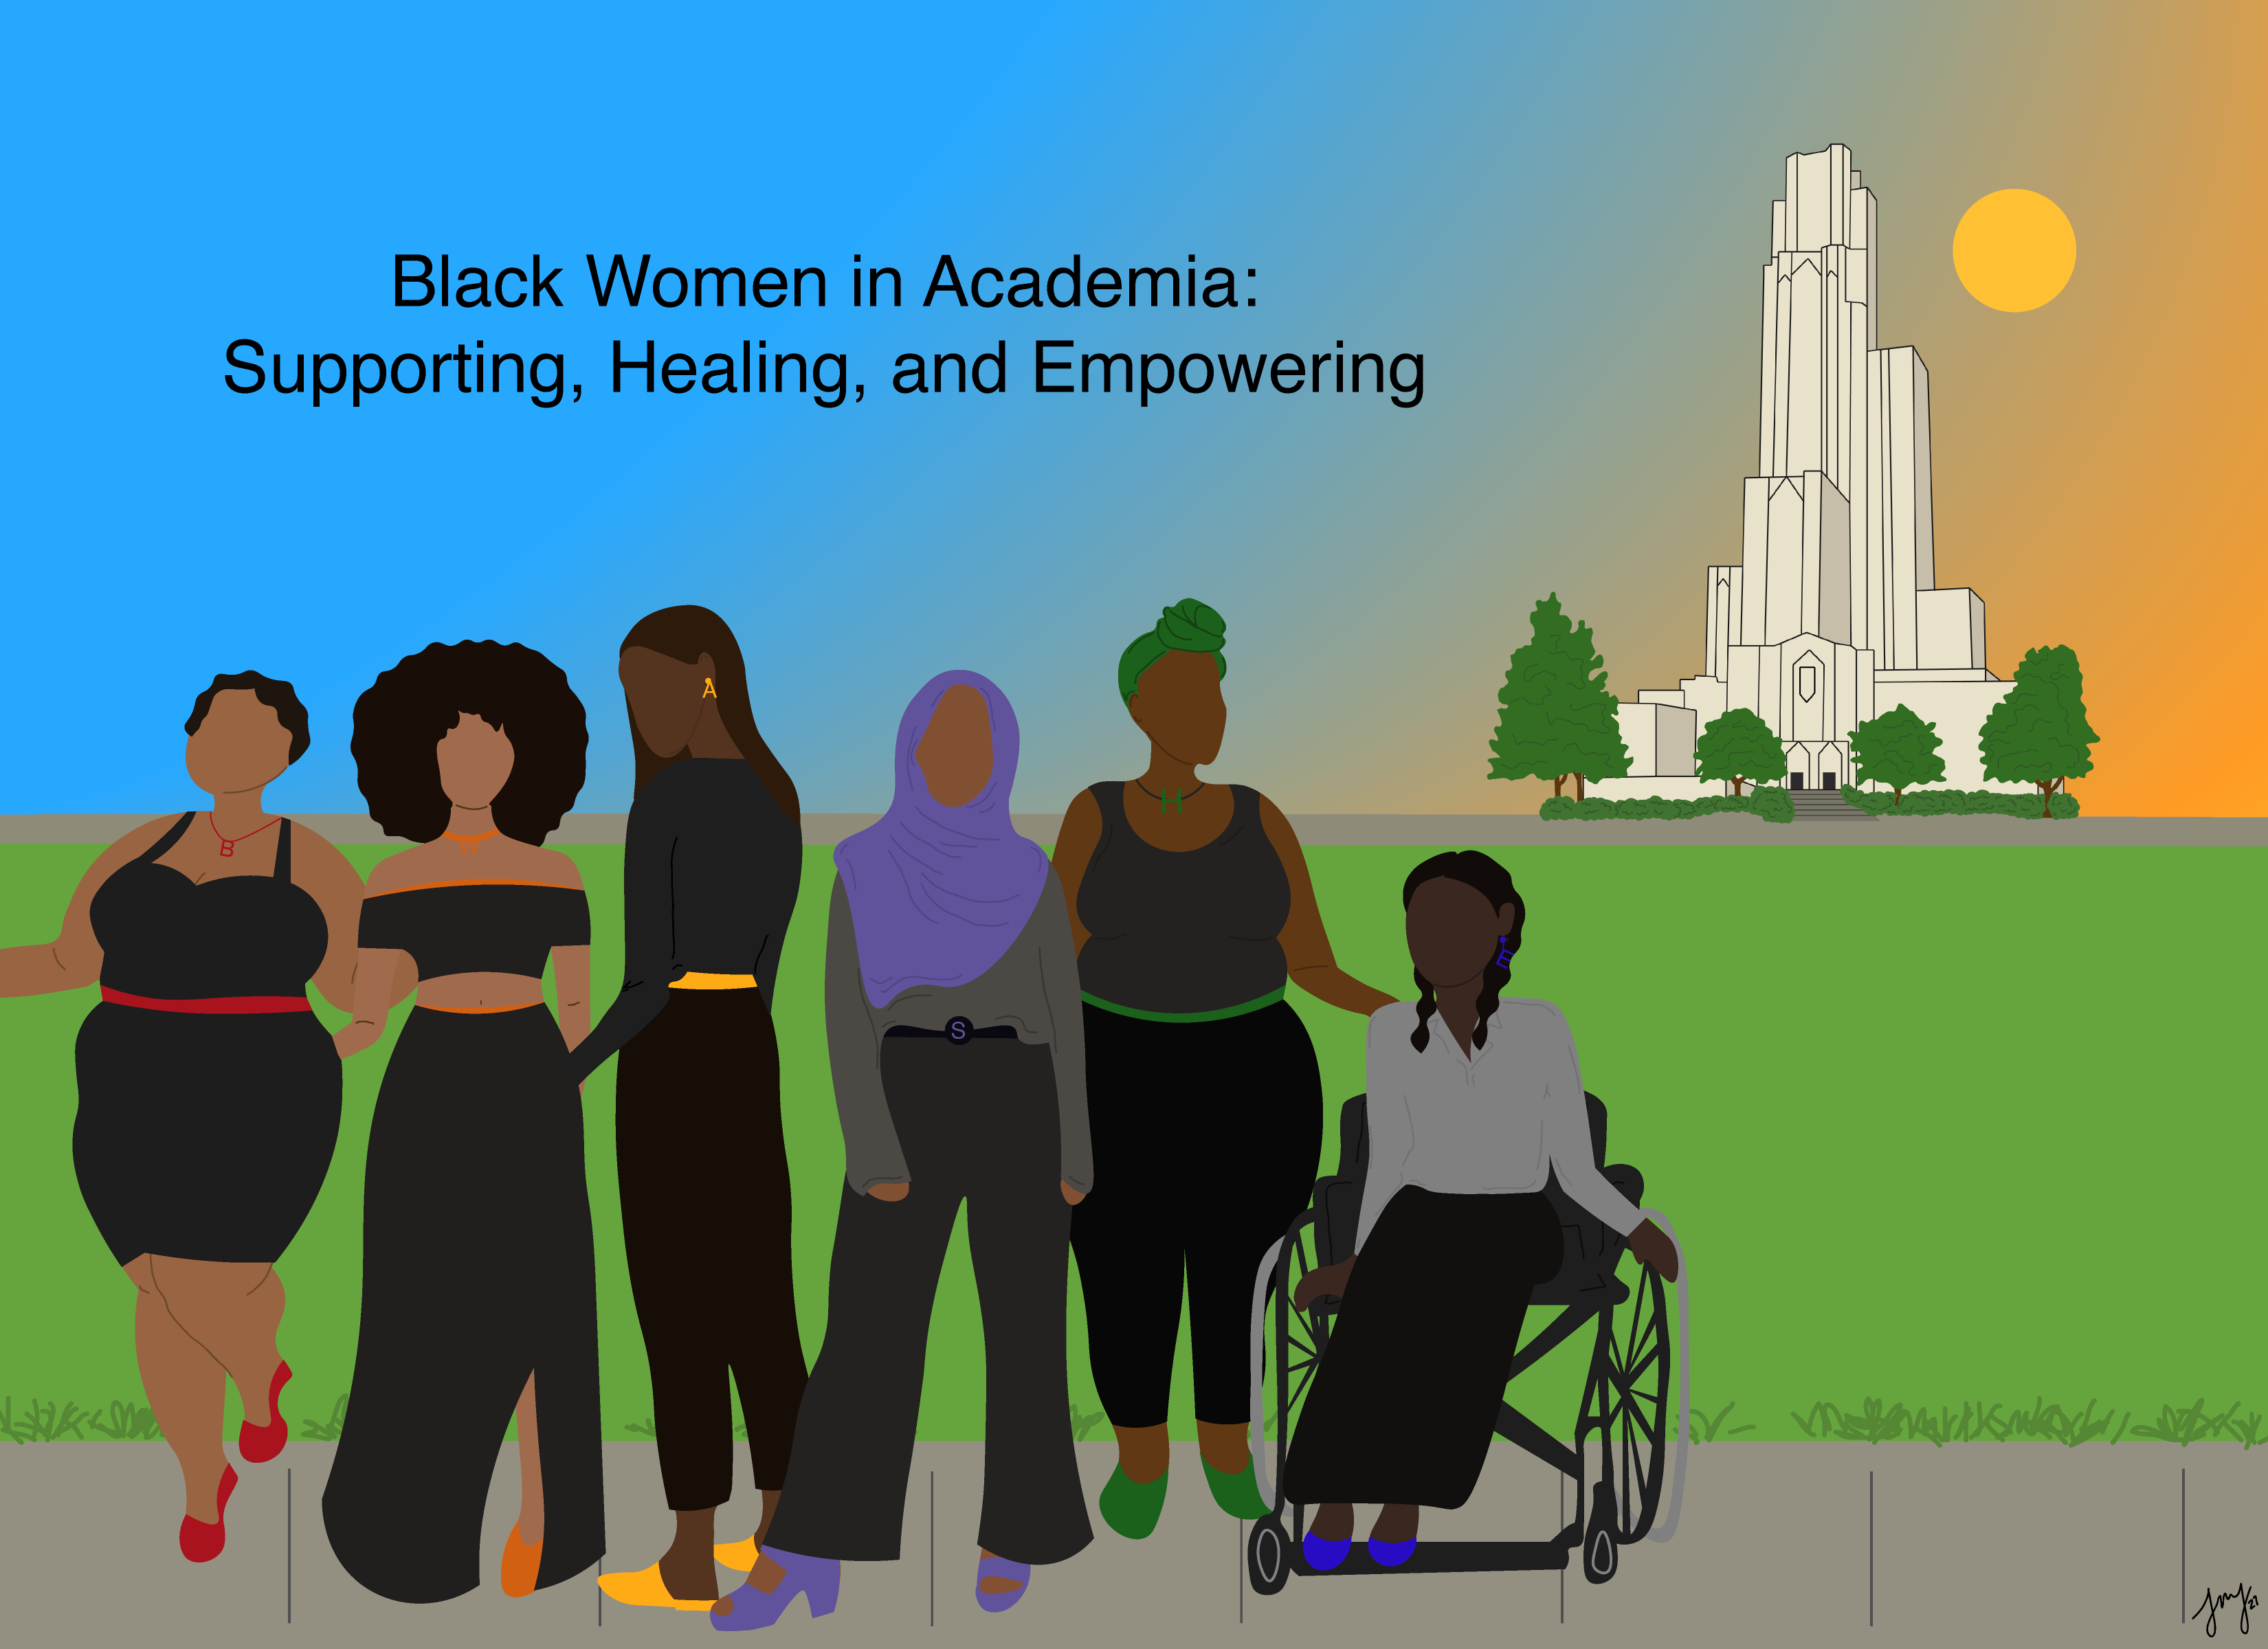 animated image, women of color of different size and ability standing in front of the cathedral of learning. Text: Black Women in Academia: Supporting, Healing, and Empowering